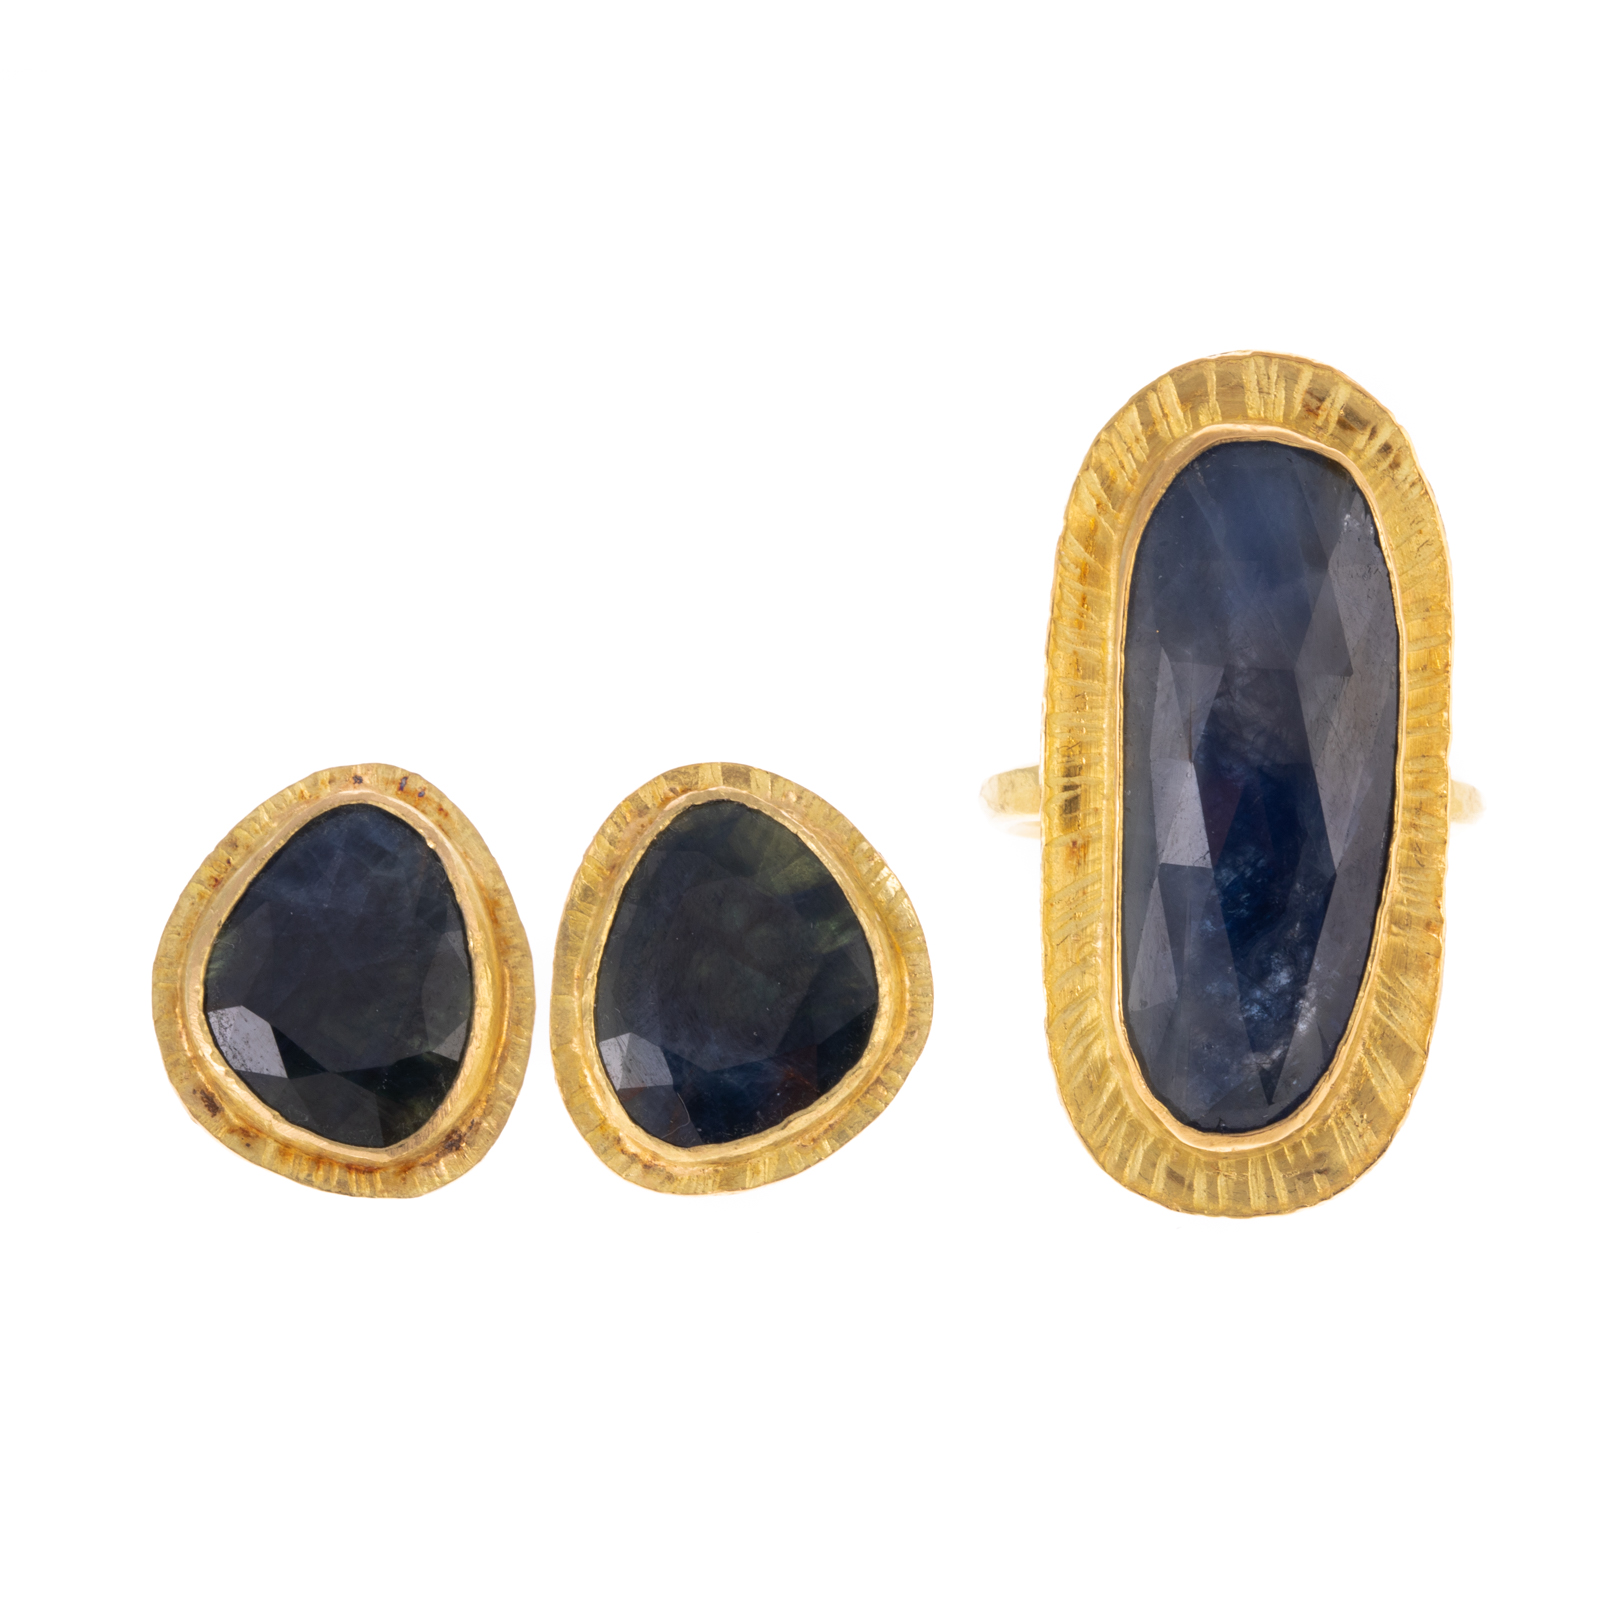 A SAPPHIRE RING MATCHING EARRINGS 338563